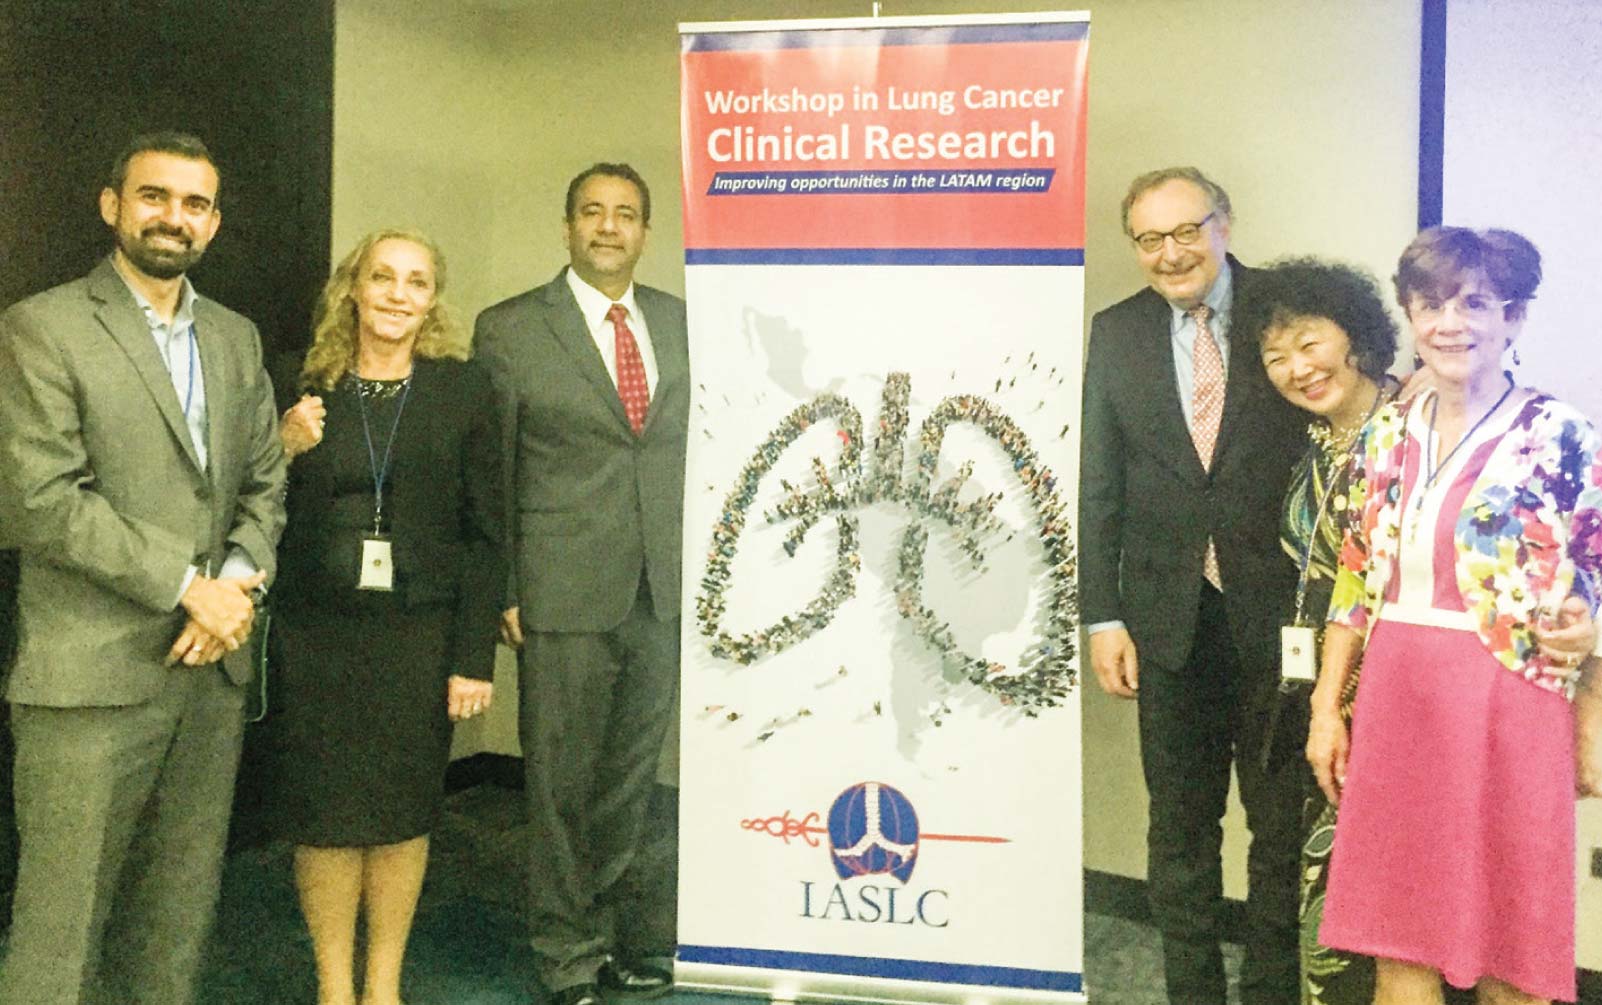 IASLC Workshop in Lung Cancer Clinical Research